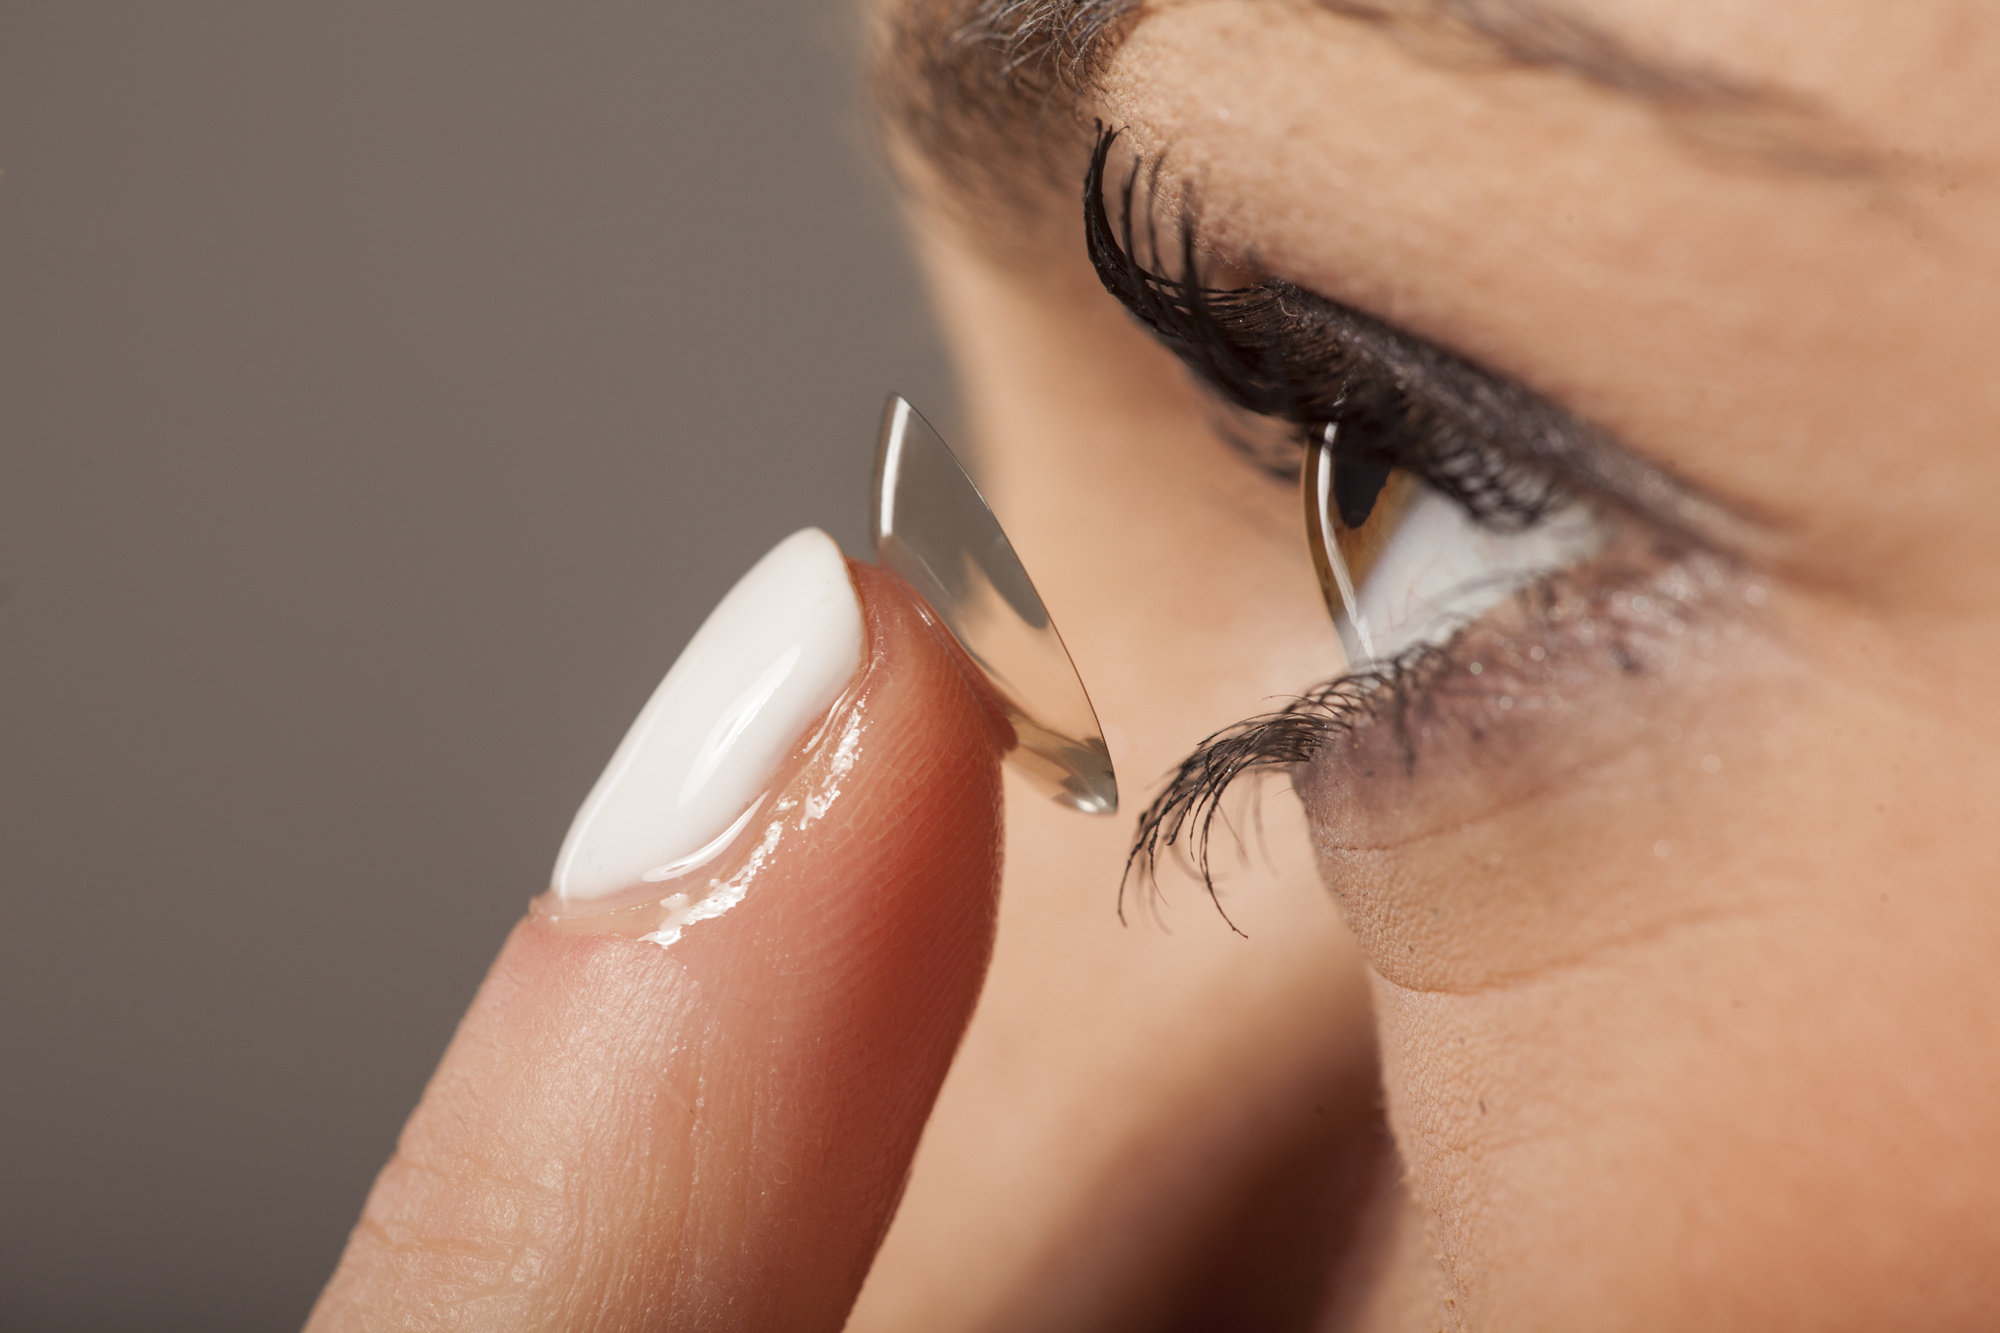 Would you like to know how to remove contact lenses? Do you know how to go about it? Read on to learn what you need to know on the subject.